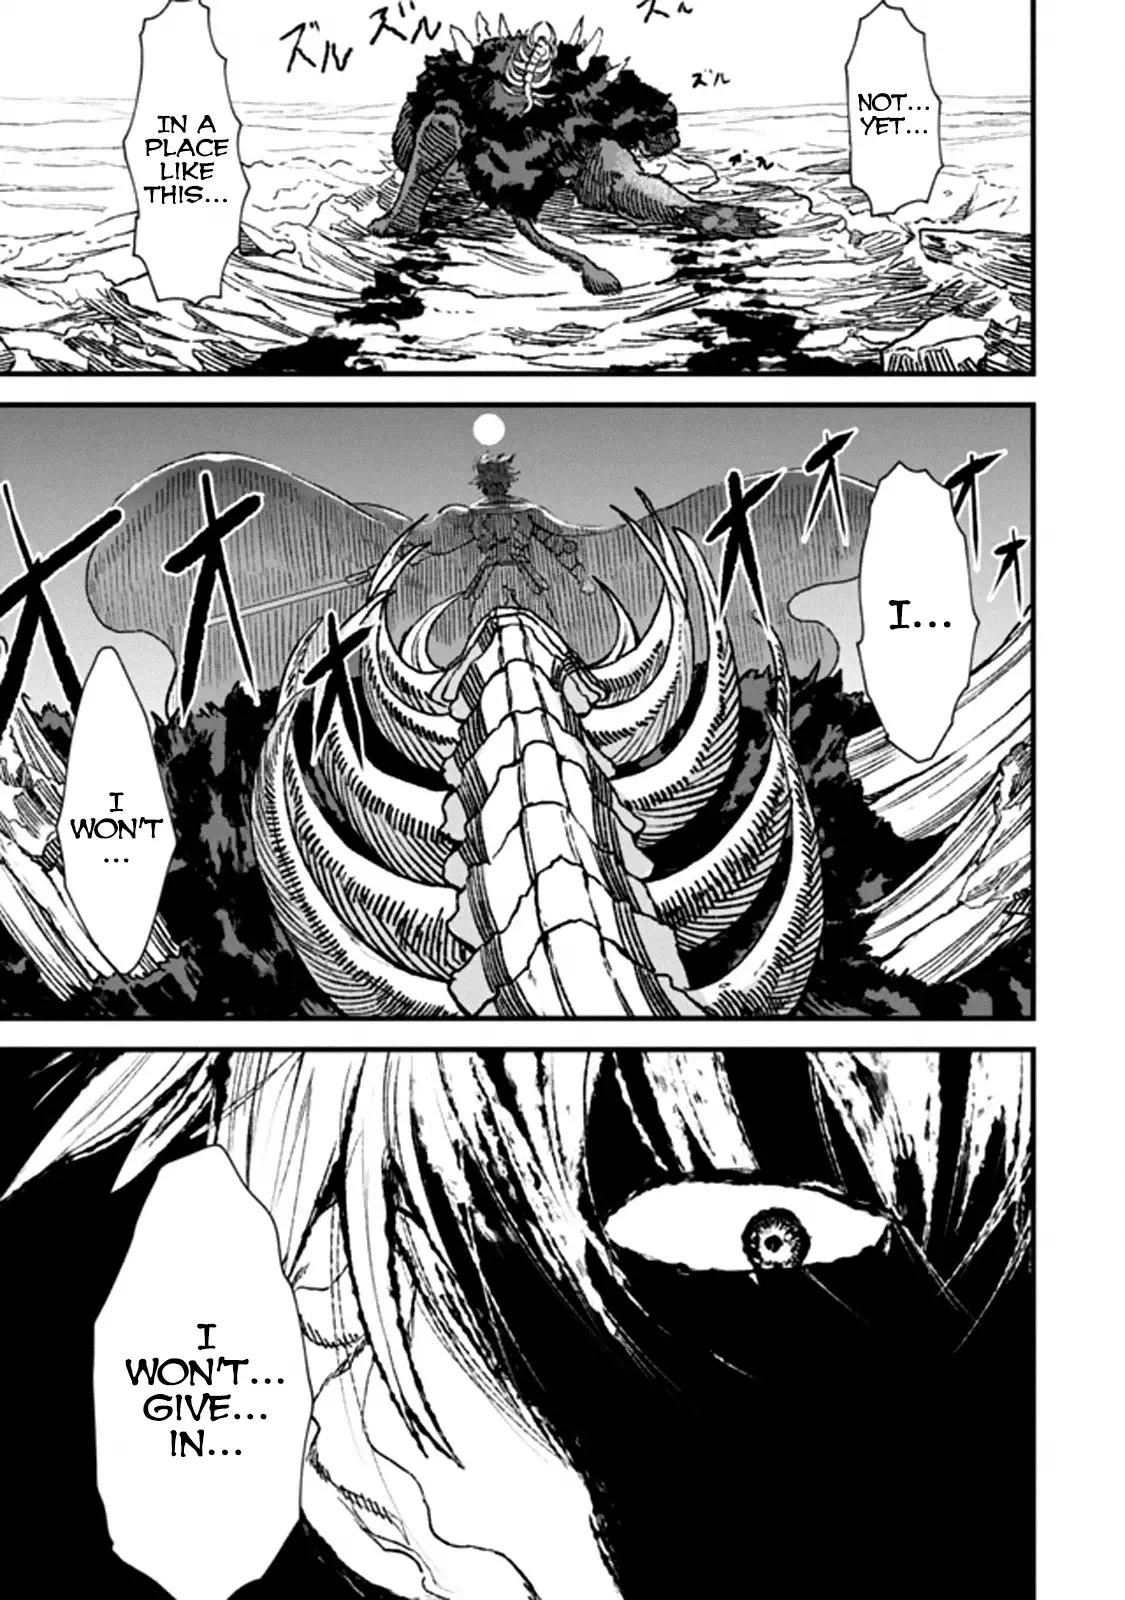 The Comeback Of The Demon King Who Formed A Demon's Guild After Being Vanquished By The Hero - 1 page 20-095654d8